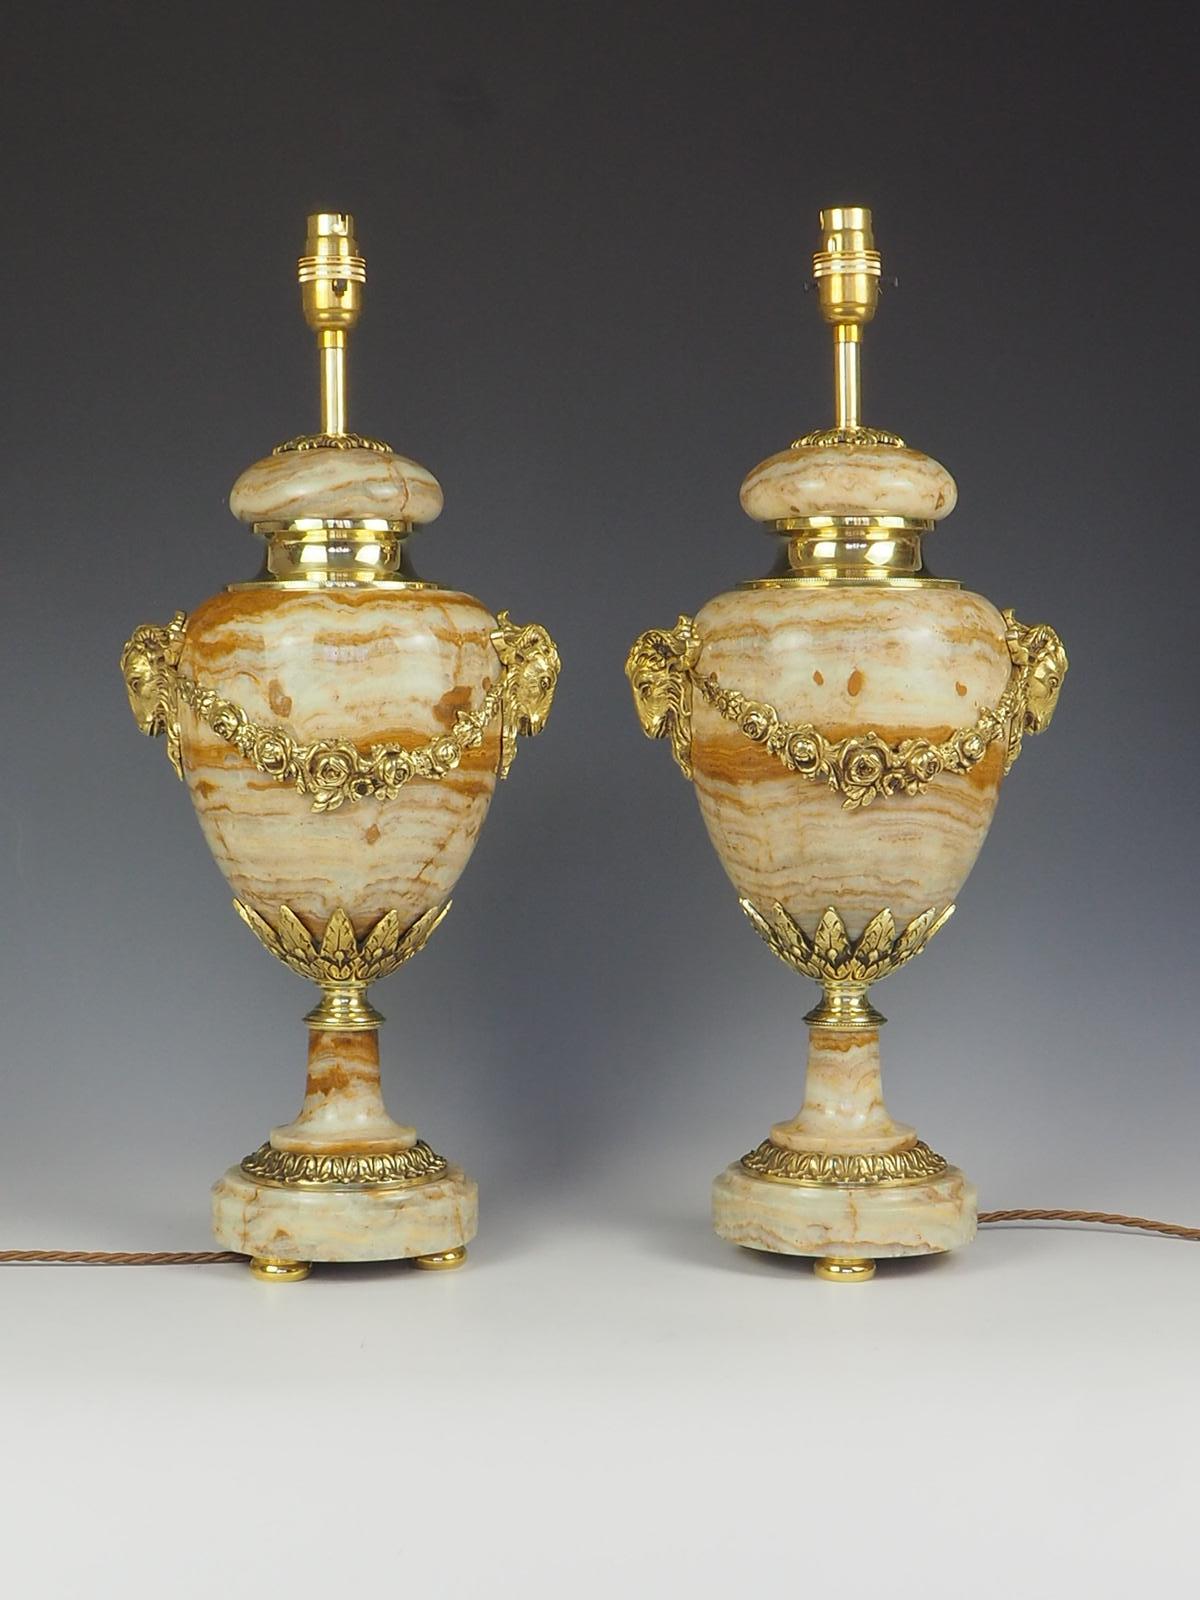 Exquisite pair of French Ormolu Cassolette Marble Table Lamps showcases the elegance and craftsmanship of the Louis XVI period.

These lamp feature stunning Ormolu bronze mounts adorned with intricate floral swags and delicate rams heads serving as